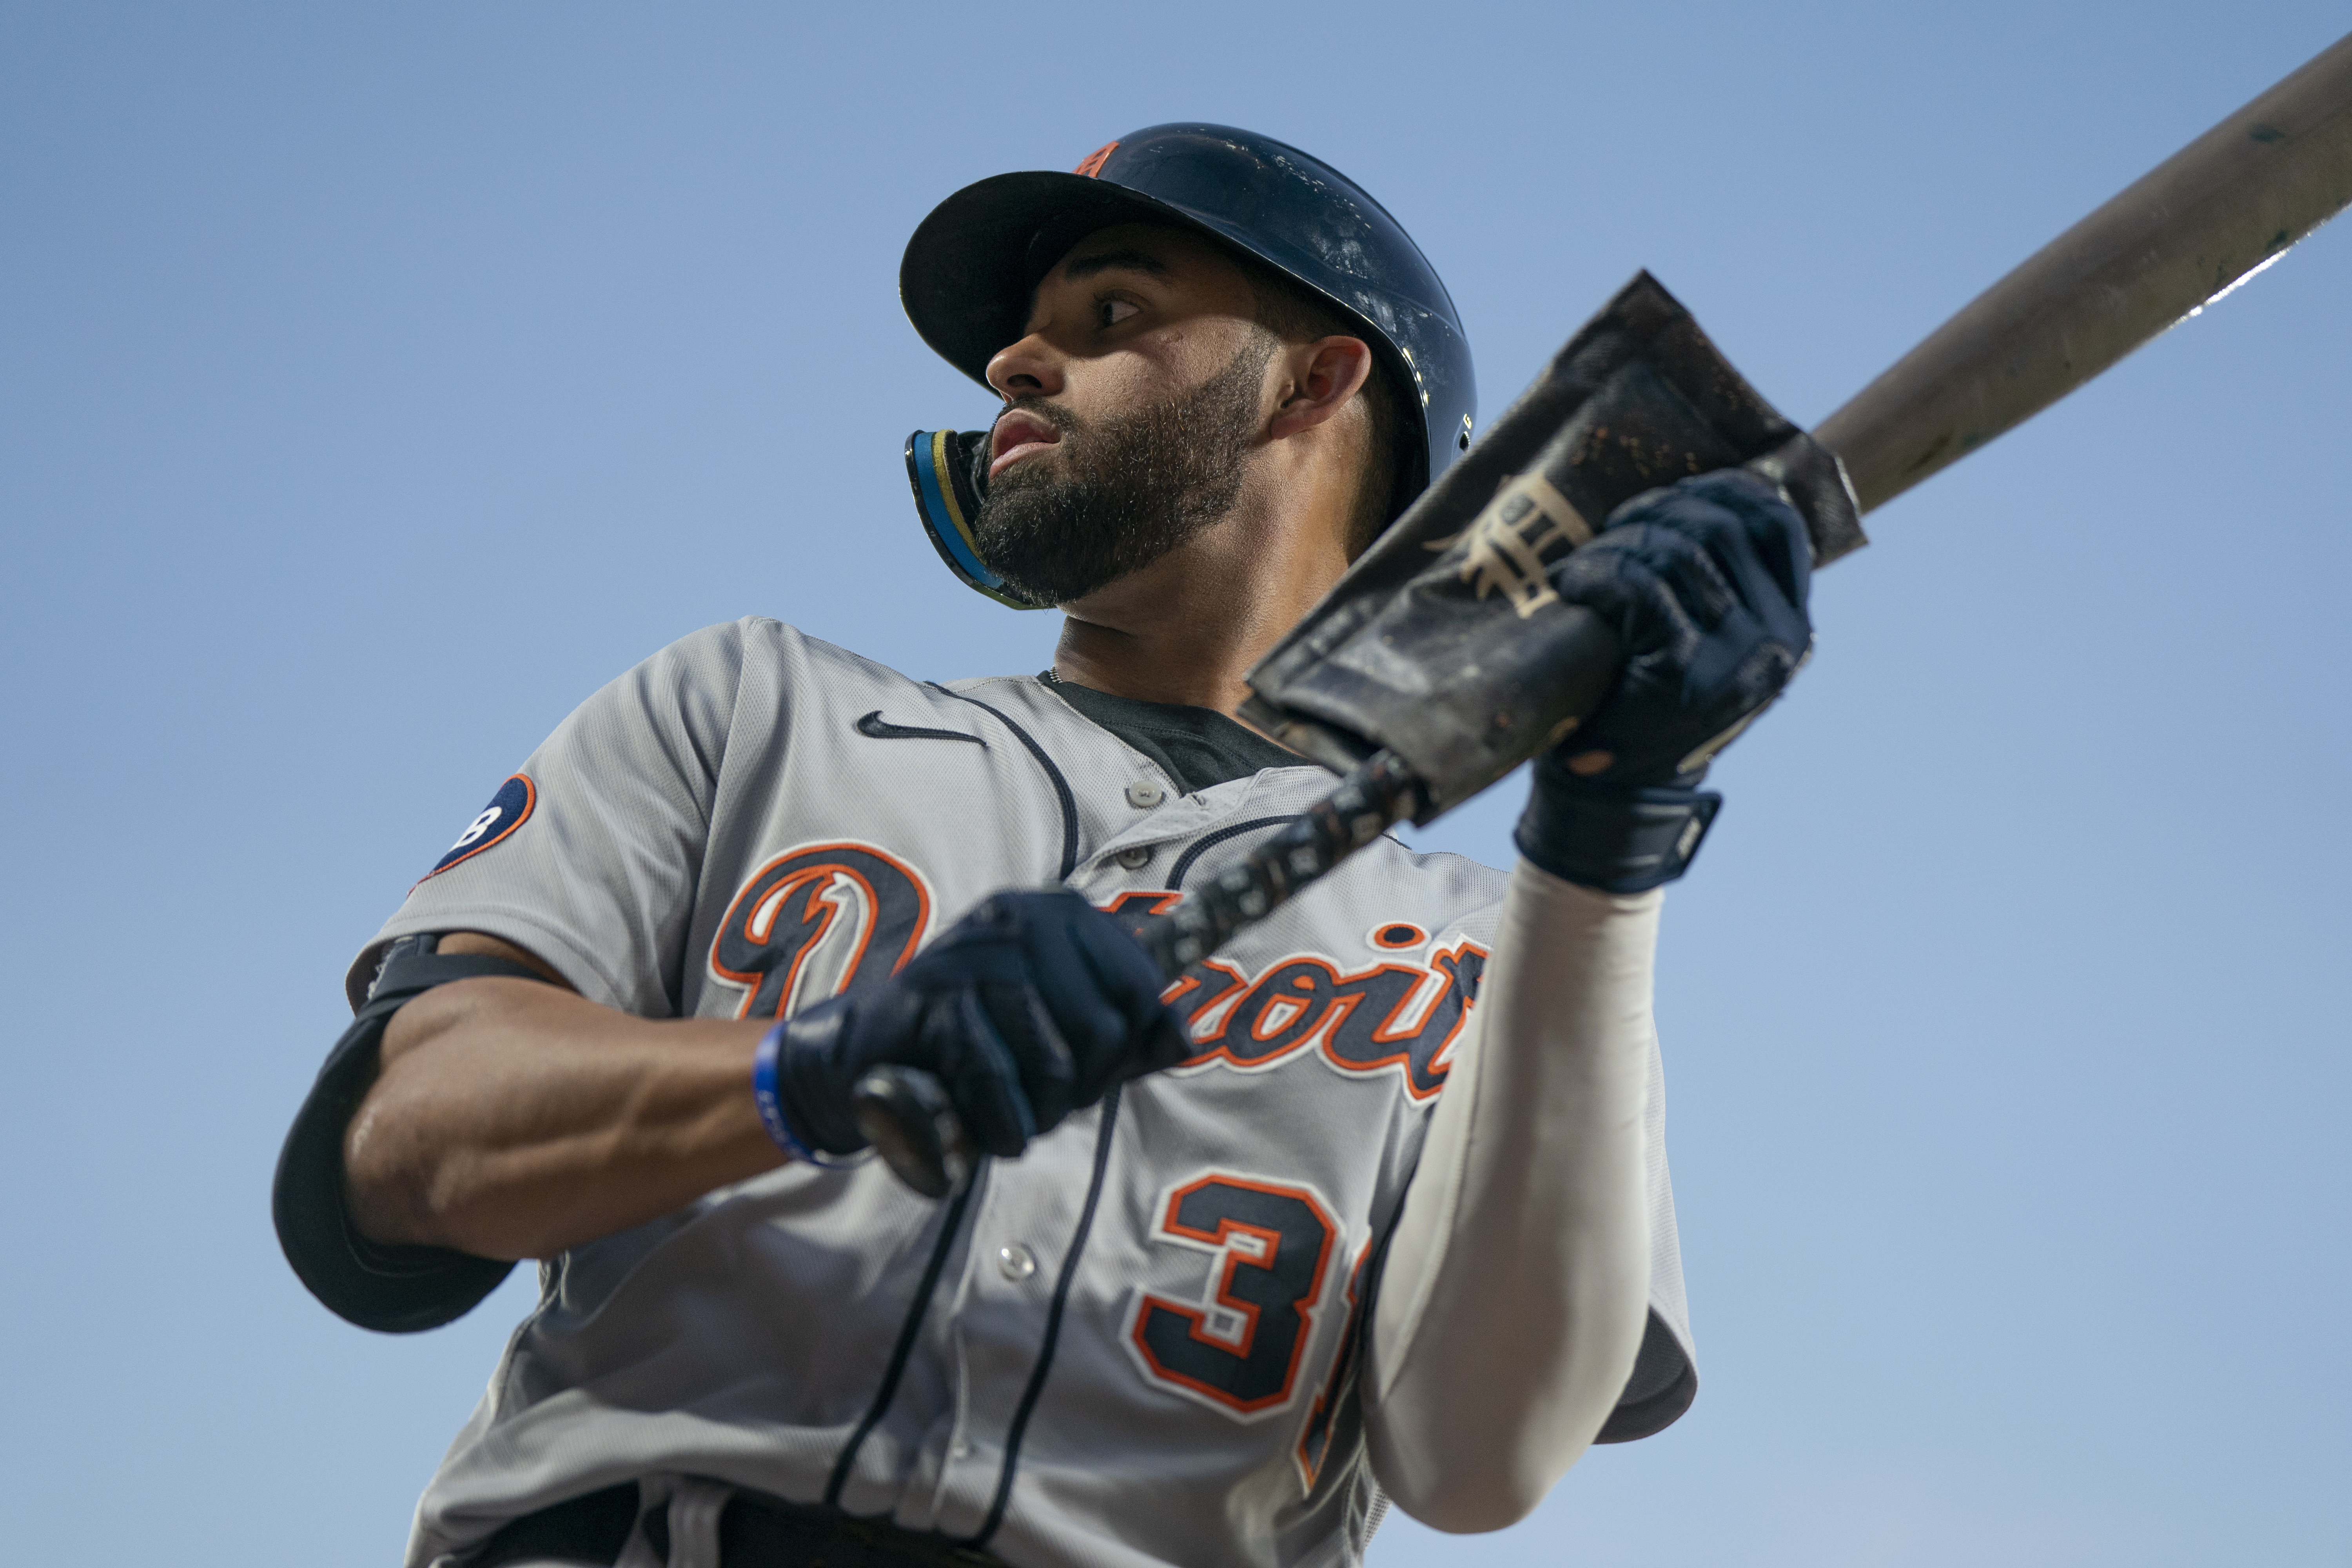 Tigers' Riley Greene bringing same swing, new 'swing thoughts' to 2023 